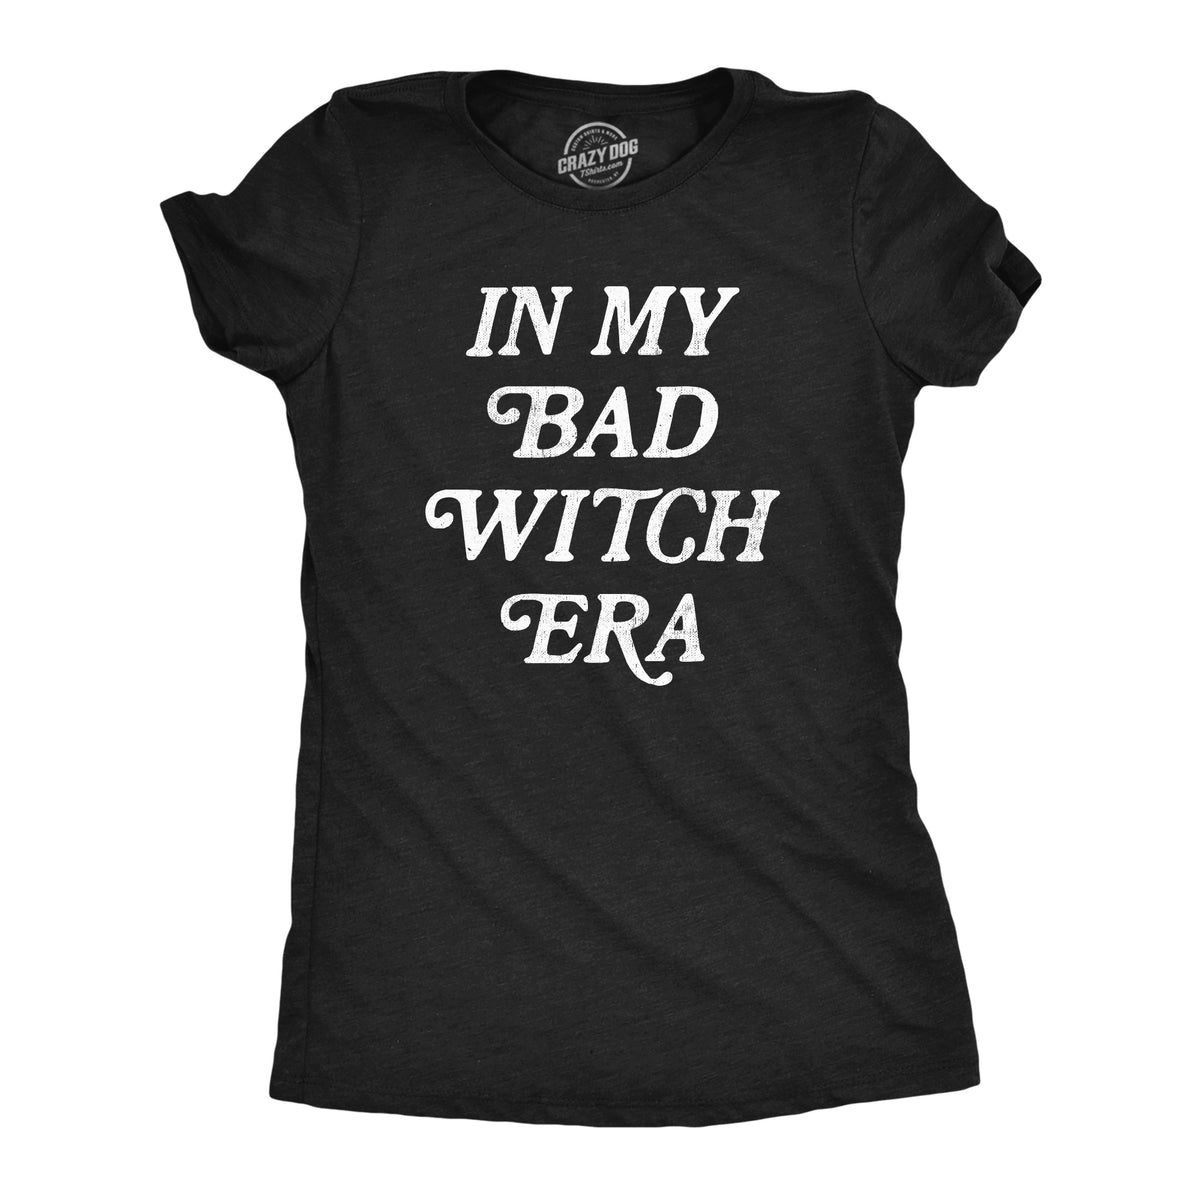 Funny Black - WITCH In My Bad Witch Era Womens T Shirt Nerdy Halloween Tee